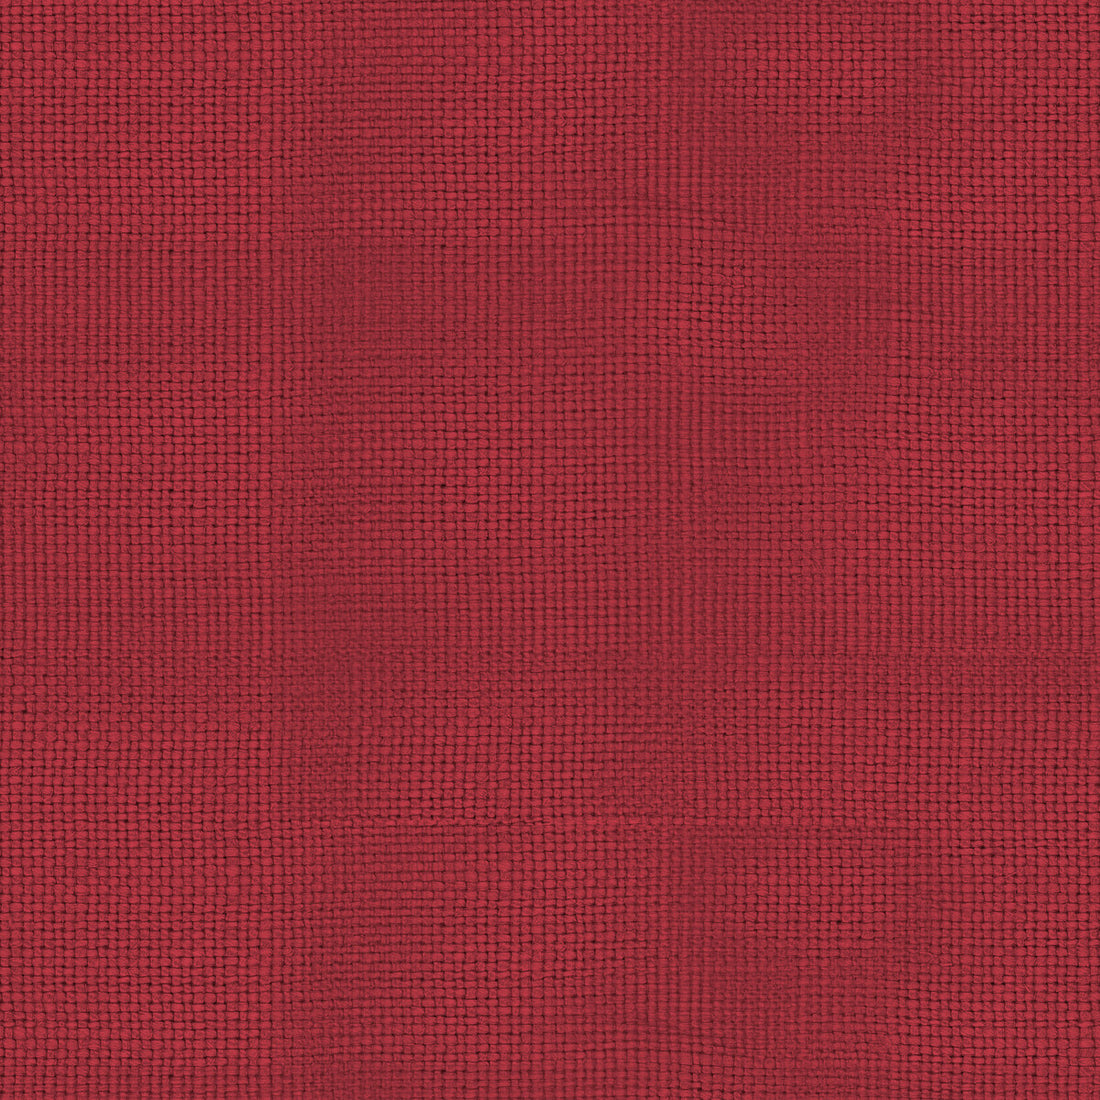 Bankers Linen fabric in red color - pattern 8017144.19.0 - by Brunschwig &amp; Fils in the Gis collection